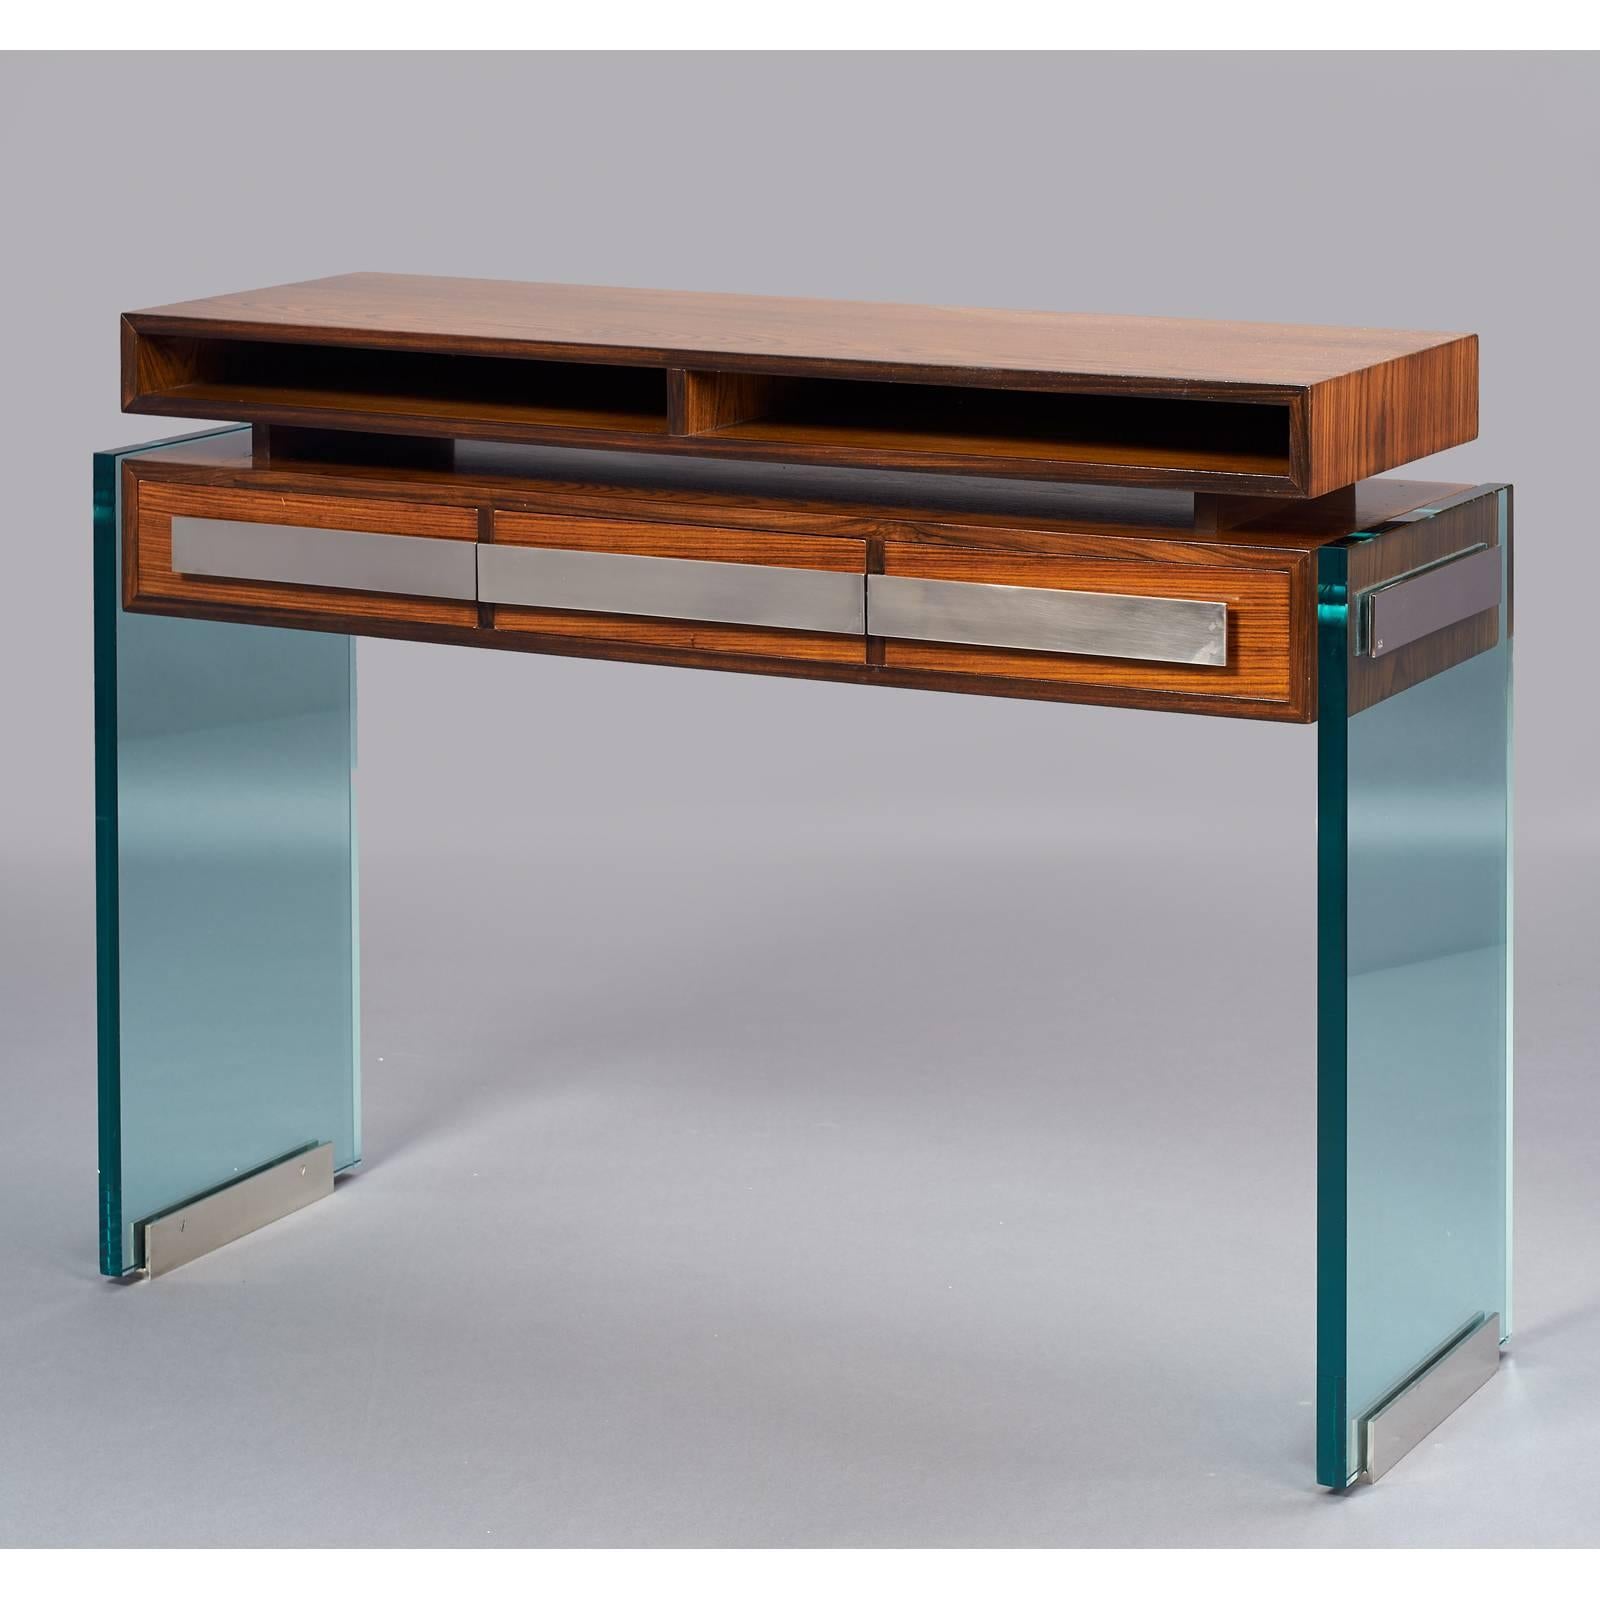 Roberto Rida (b. 1943).
A modernist console table in polished wood, raised on massive glass legs with nickeled bronze drawer pulls and mounts. Three drawers below, two storage niches above. Finished on all sides, may be used floating. Unique piece.